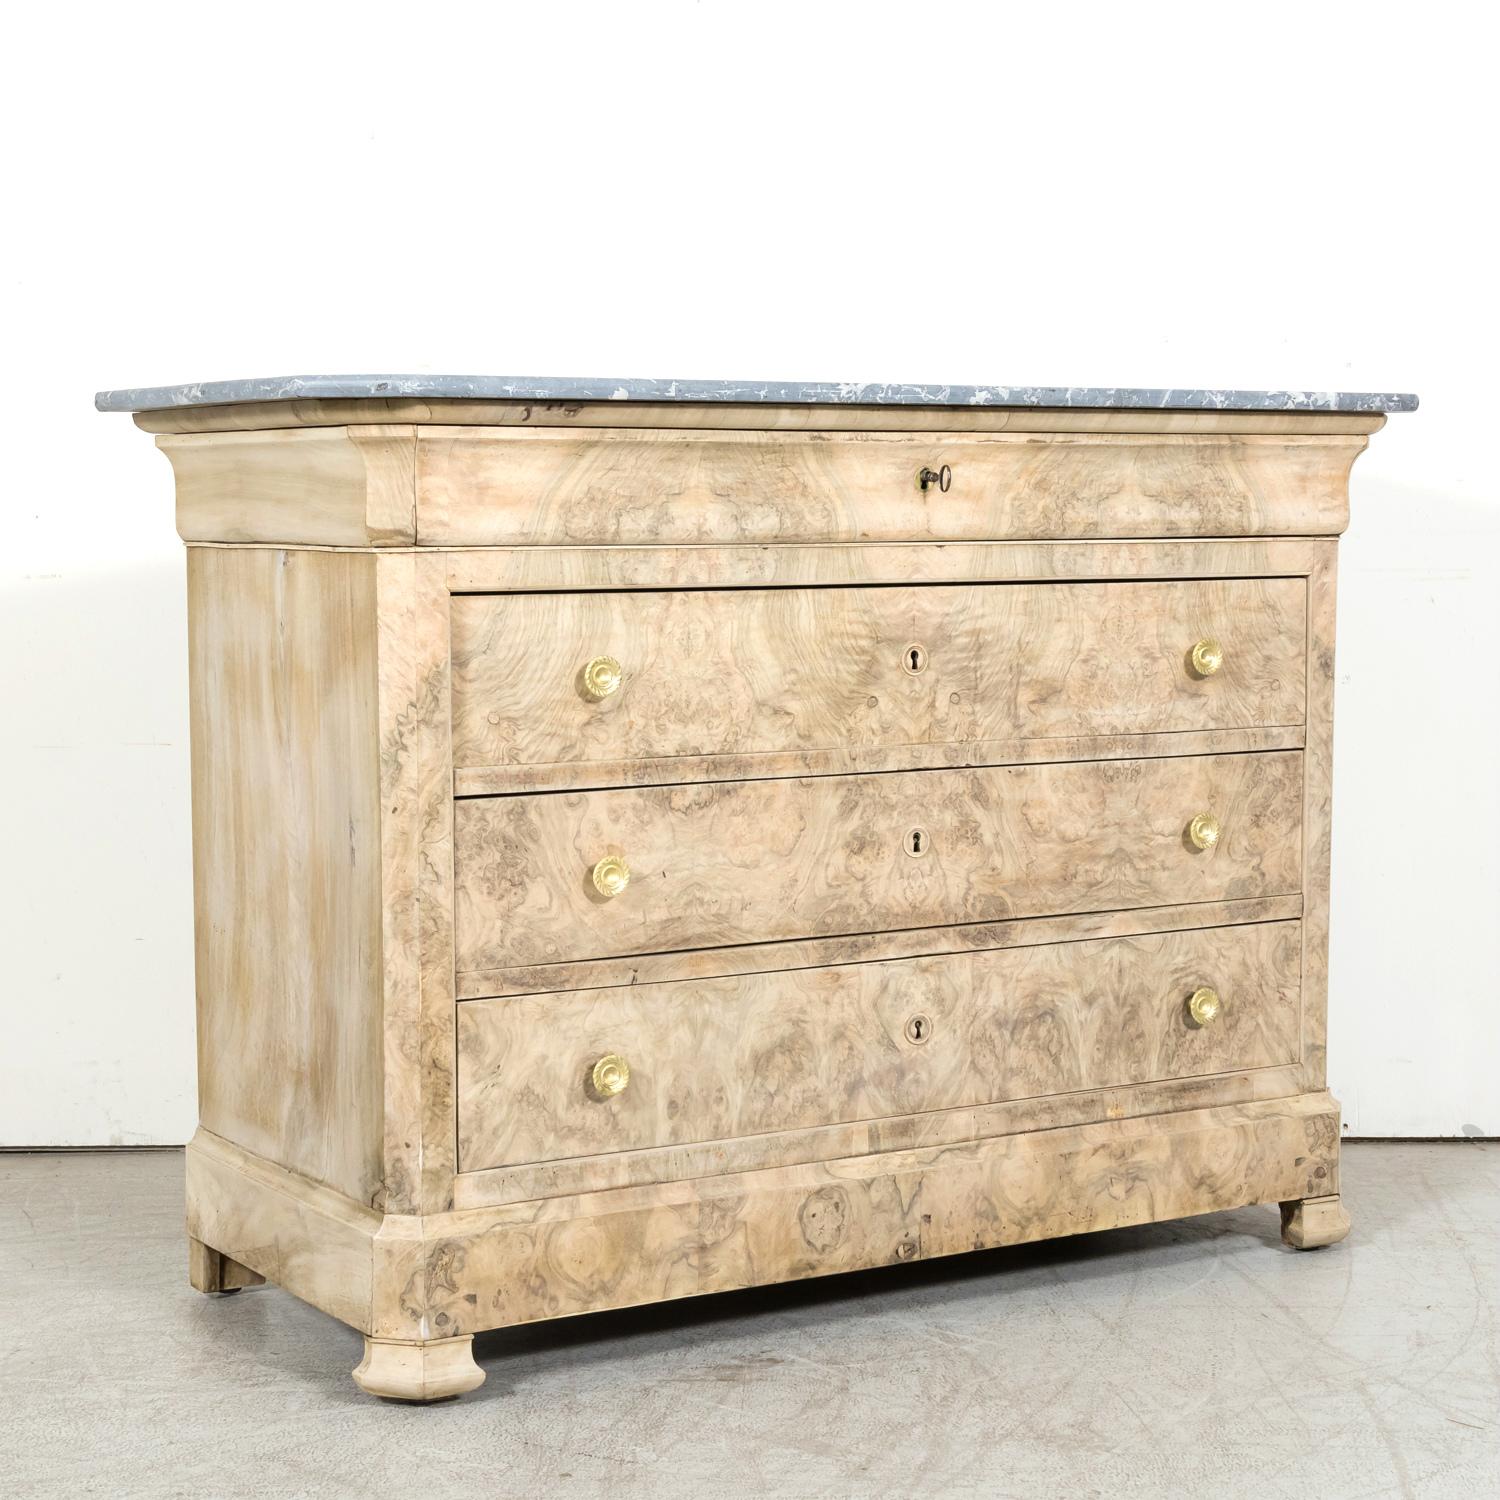 A handsome 19th century French Louis Philippe style four-drawer bleached commode, circa 1880s. Handcrafted of walnut and meticulously bookmatched burled walnut, this handsome commode is complimented by its original Saint Anne gray marble top with an